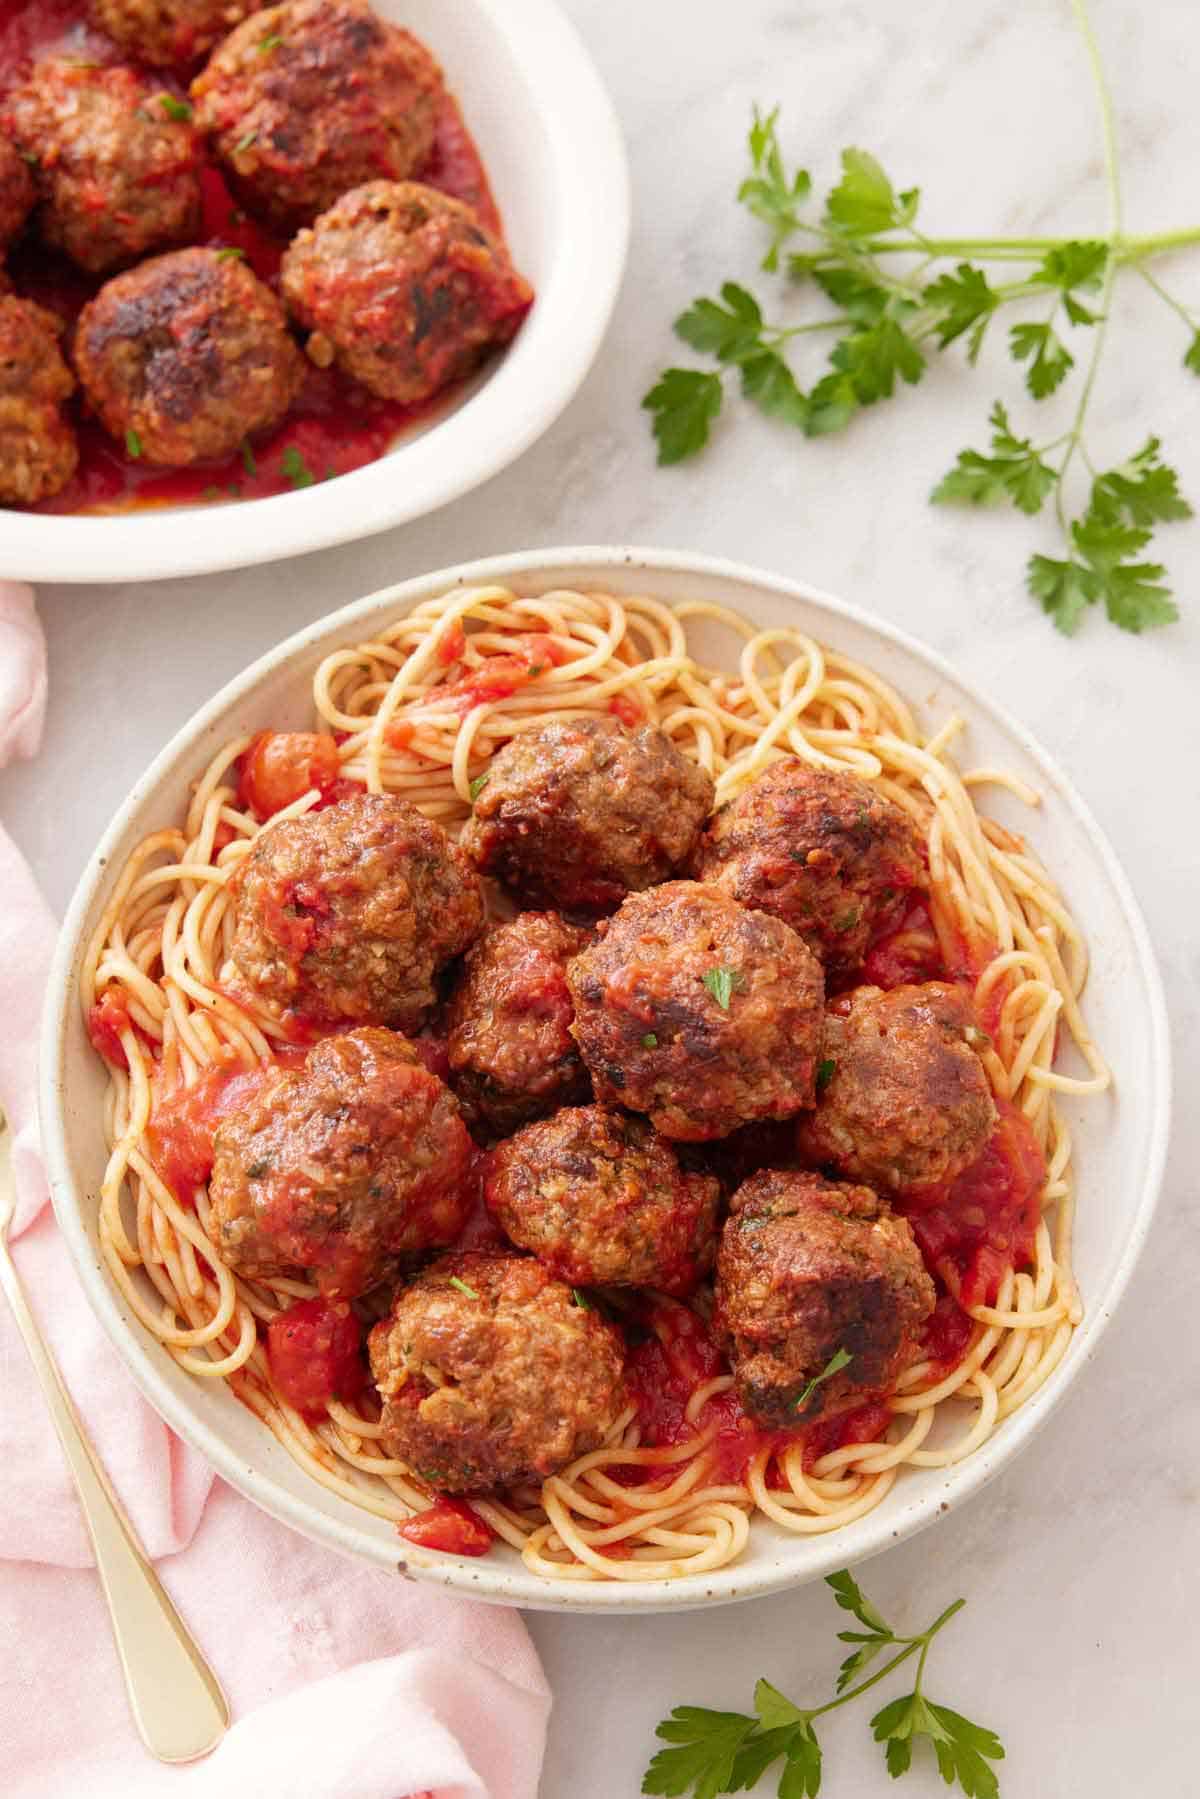 Overhead view of a bowl of spaghetti topped with meatballs and some sauce.